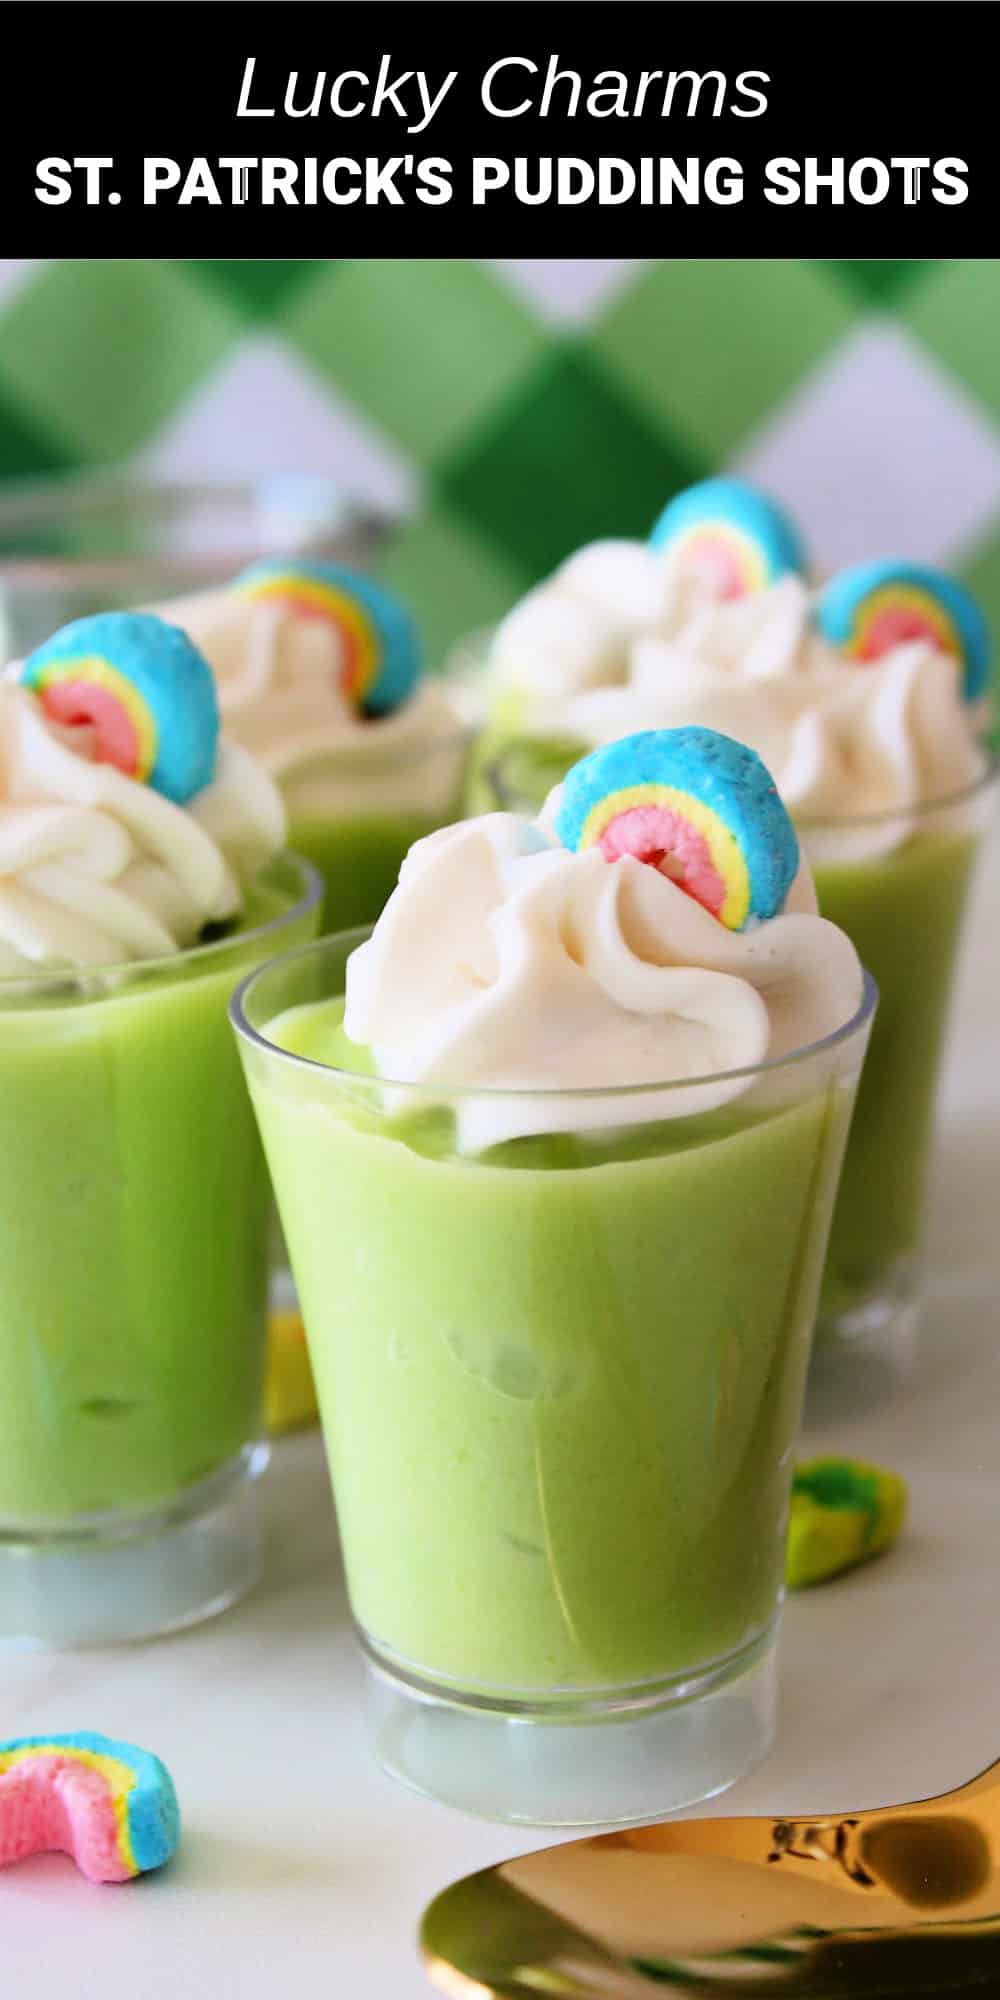 If you’re looking for a fun and creative treat for this year’s St. Patrick’s Day party, try these delicious Lucky Charms pudding shots. Vanilla pudding, Irish Cream liqueur, and Lucky Charms marshmallows combine to create this festive boozy treat that will look amazing on your party table.